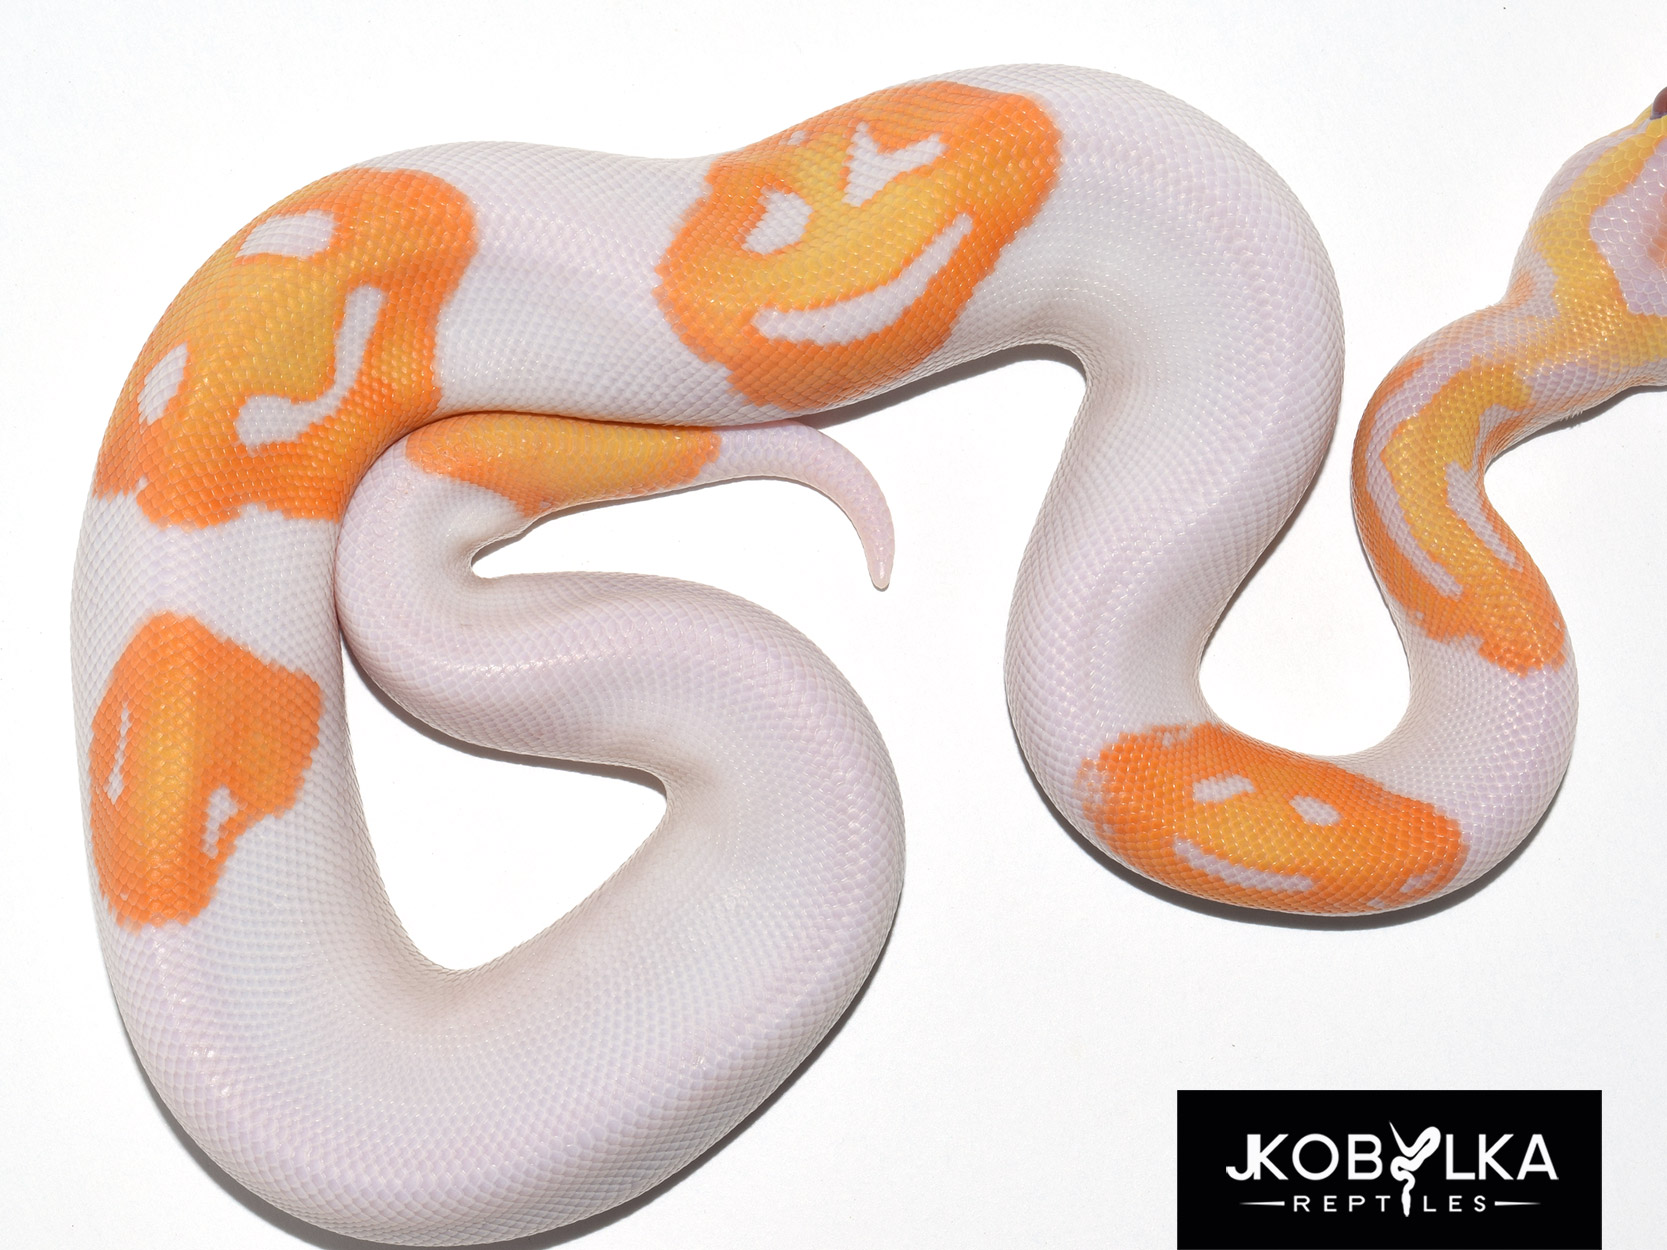 It Took A Breeder 8 Years To Make This Emoji Snake Happen